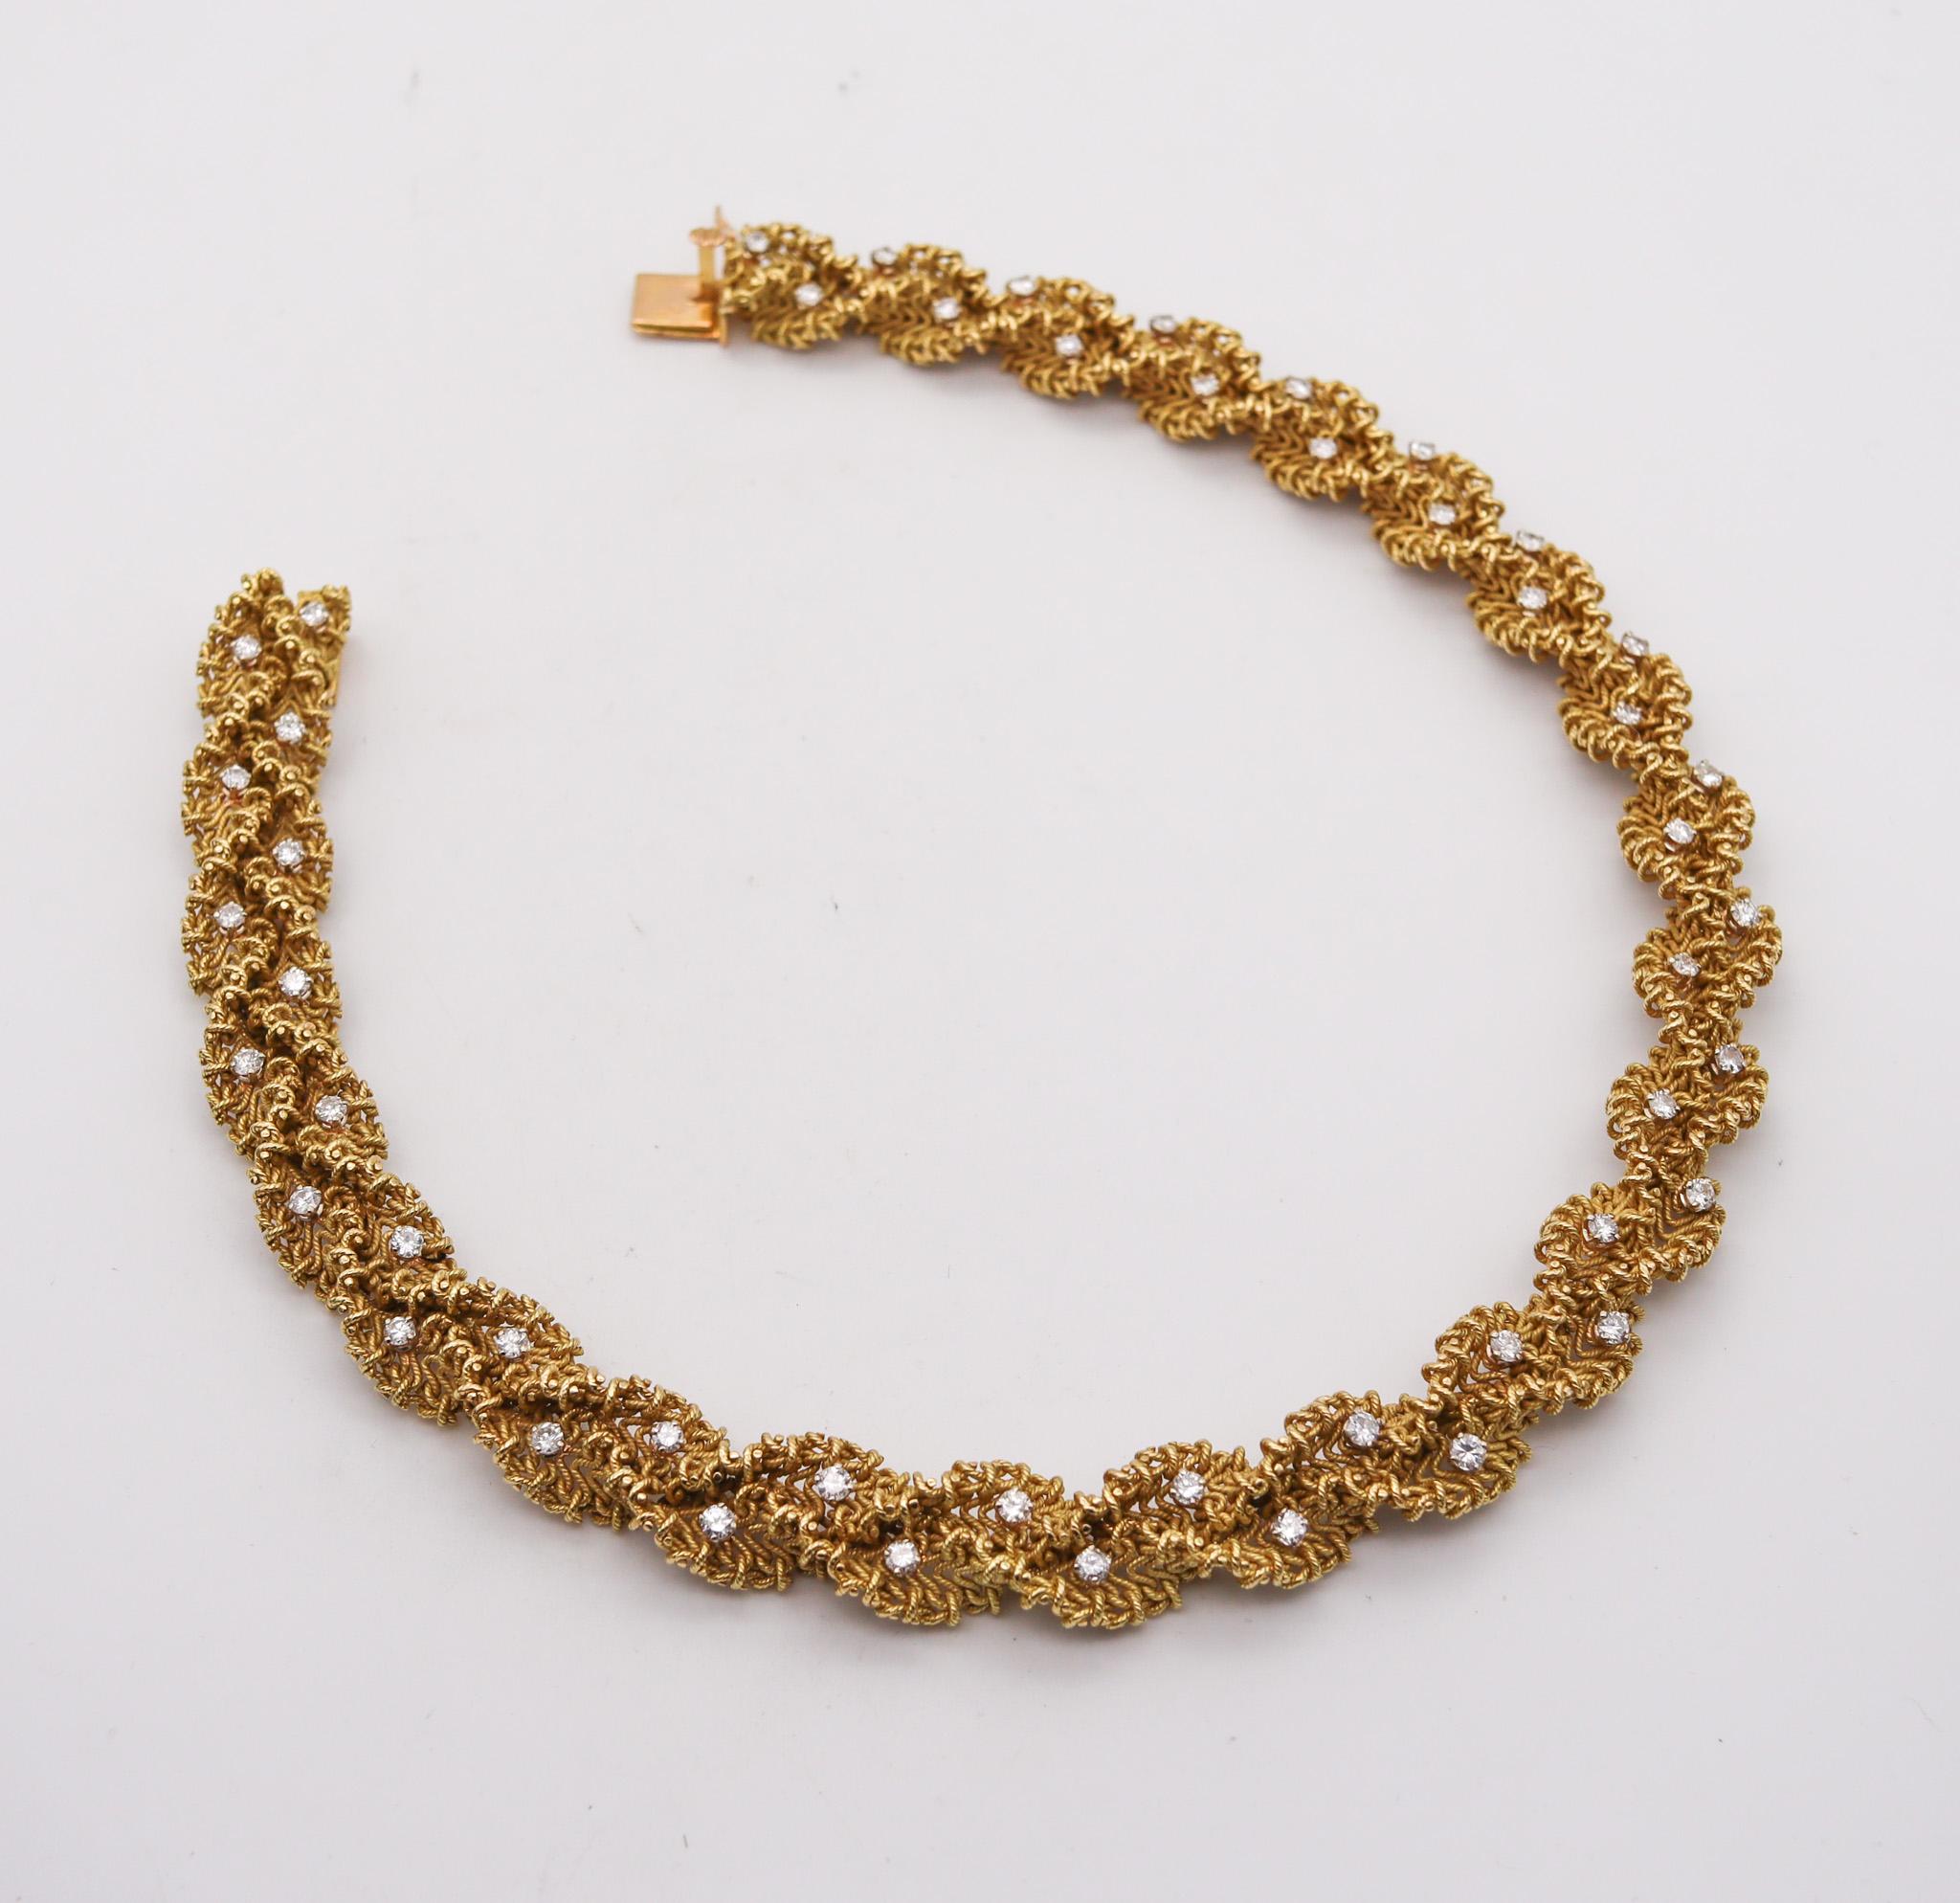 Brilliant Cut Chantecler 1960 Textured Twisted Necklace In 18Kt Gold With 5.15 Ctw In Diamonds For Sale